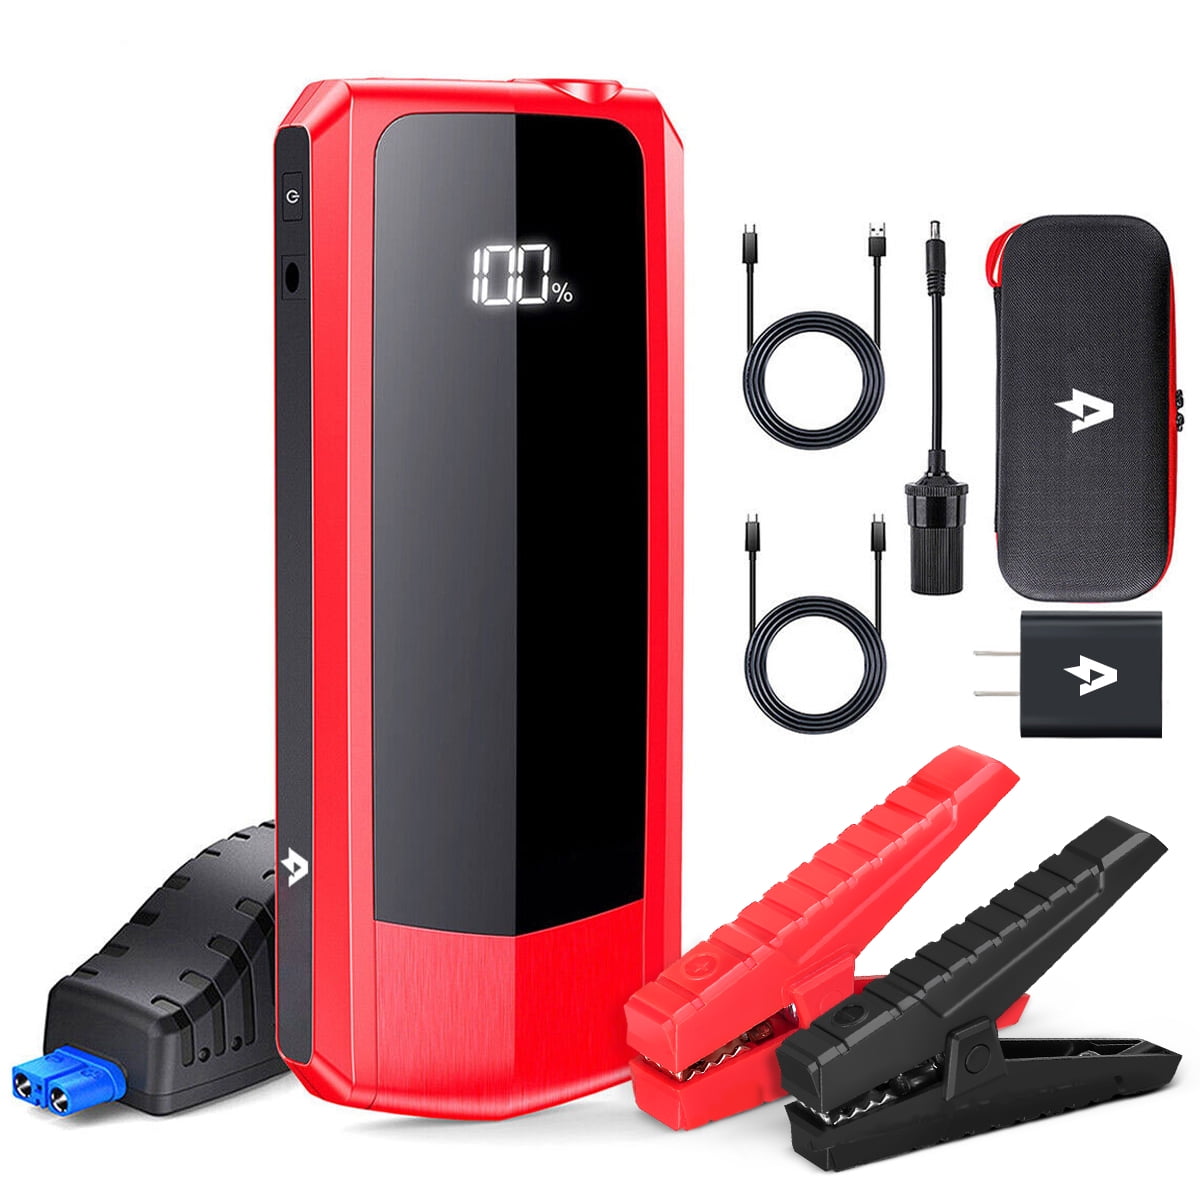 Audew (Andeman) Car Jump Starter, 2000A Peak 20000mAh Battery Jump Starter, Start Any Gas Engine or up to 8.5L Diesel Engine, 12V Car Jumper, Battery Booster Power Pack, Quick Charge 3.0 Ports, Red - image 1 of 11